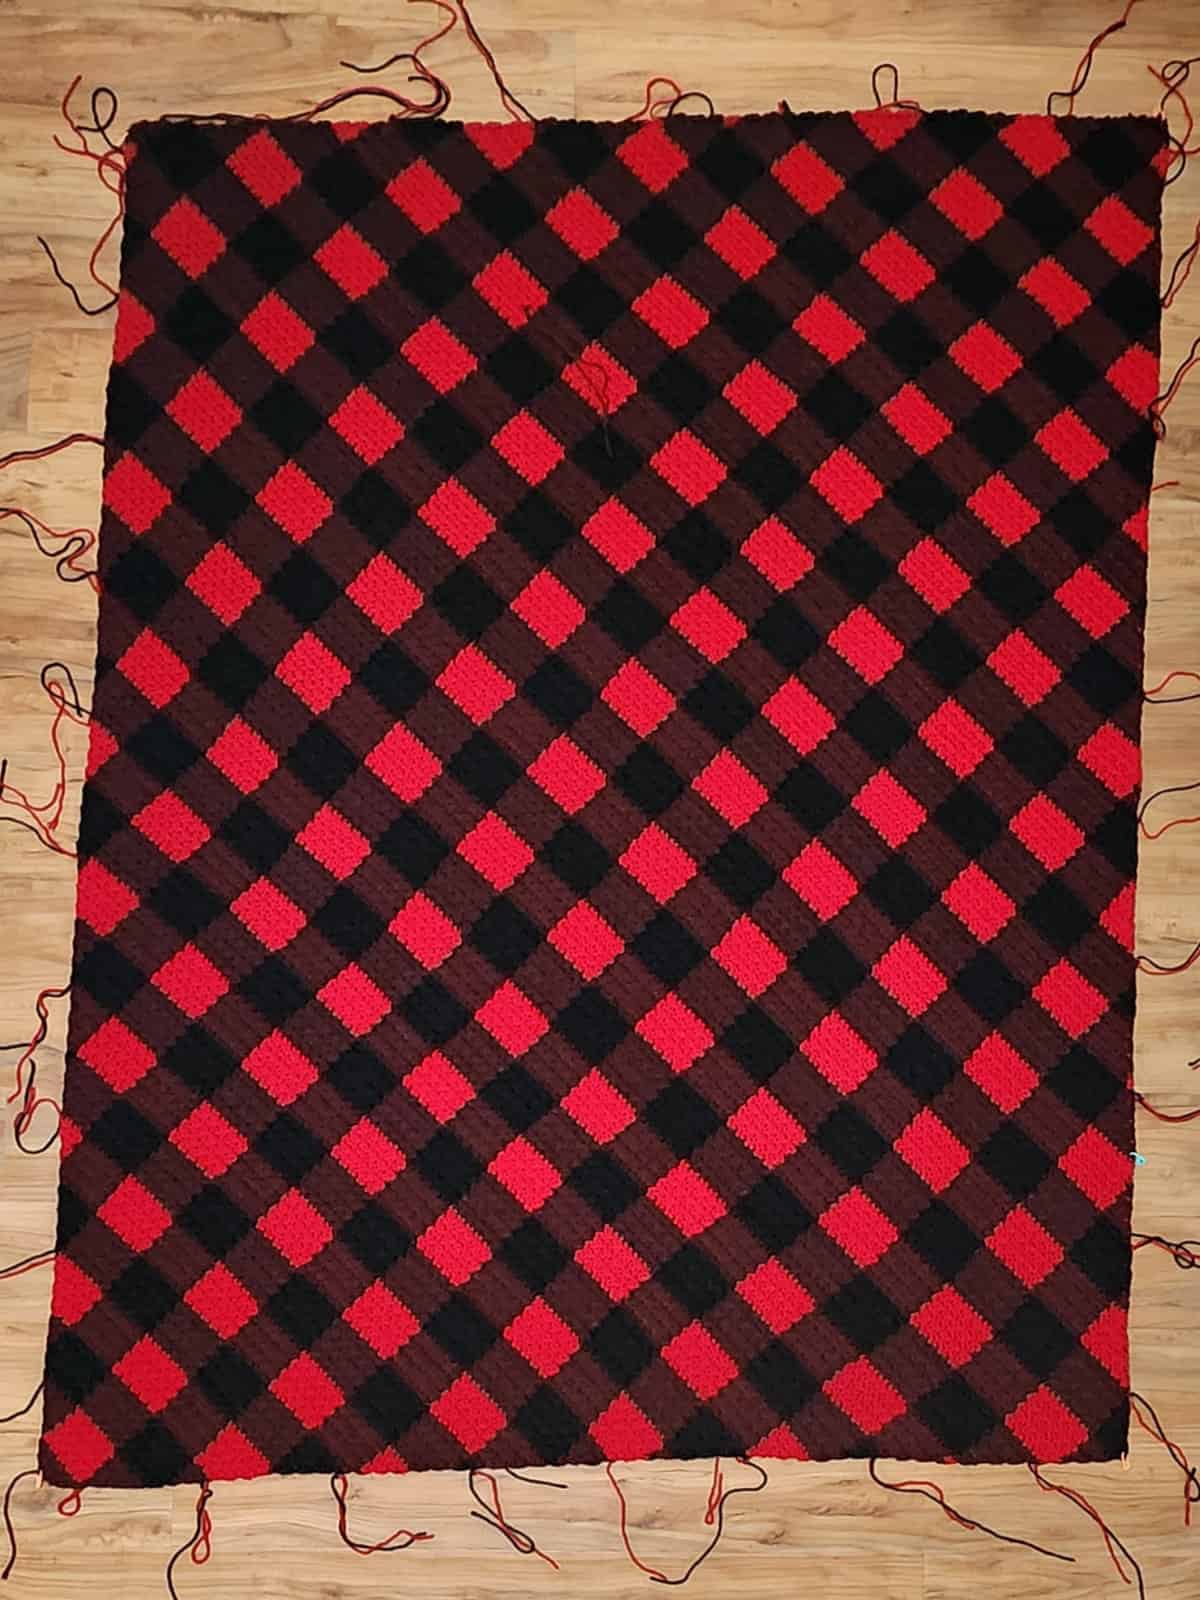 This image shows the main portion of a red and black buffalo plaid corner to corner blanket complete before adding a border.